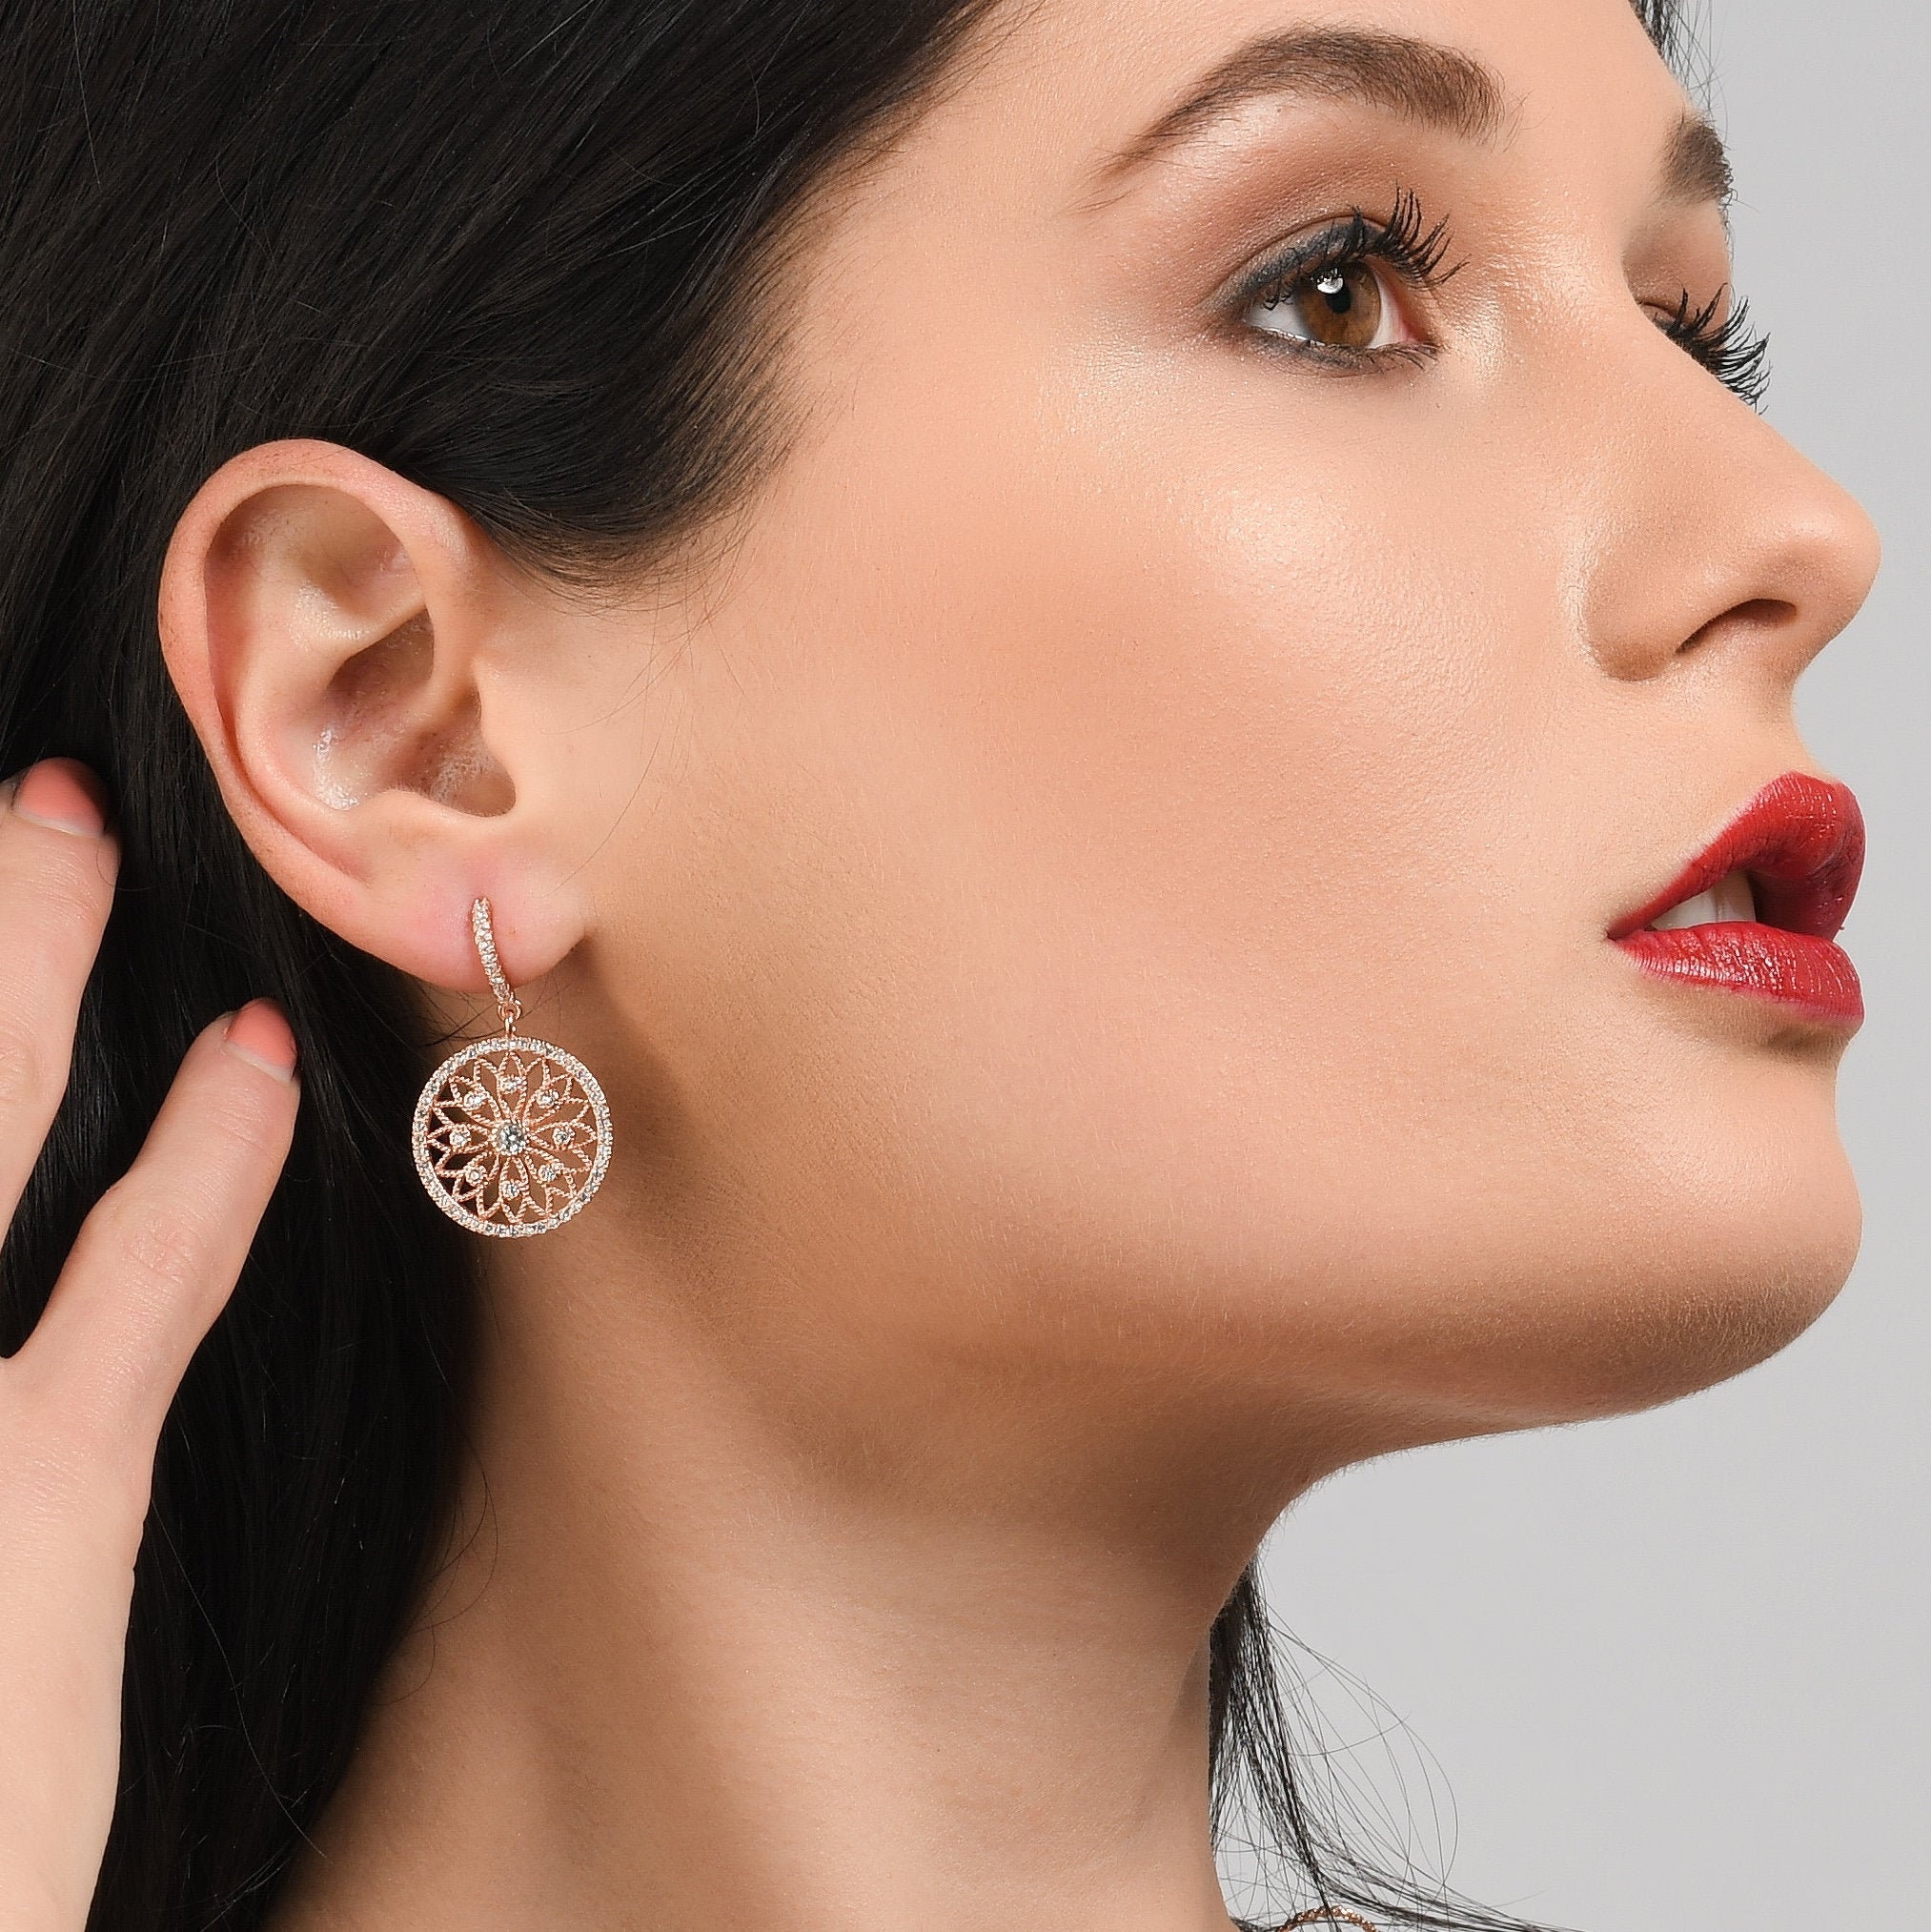 With Rose Gold Gold Intricate Earrings Dangle Women, Filigree Earrings for Stones Earrings Plated Drop CZ for and Details - Women, Rose Round Etsy